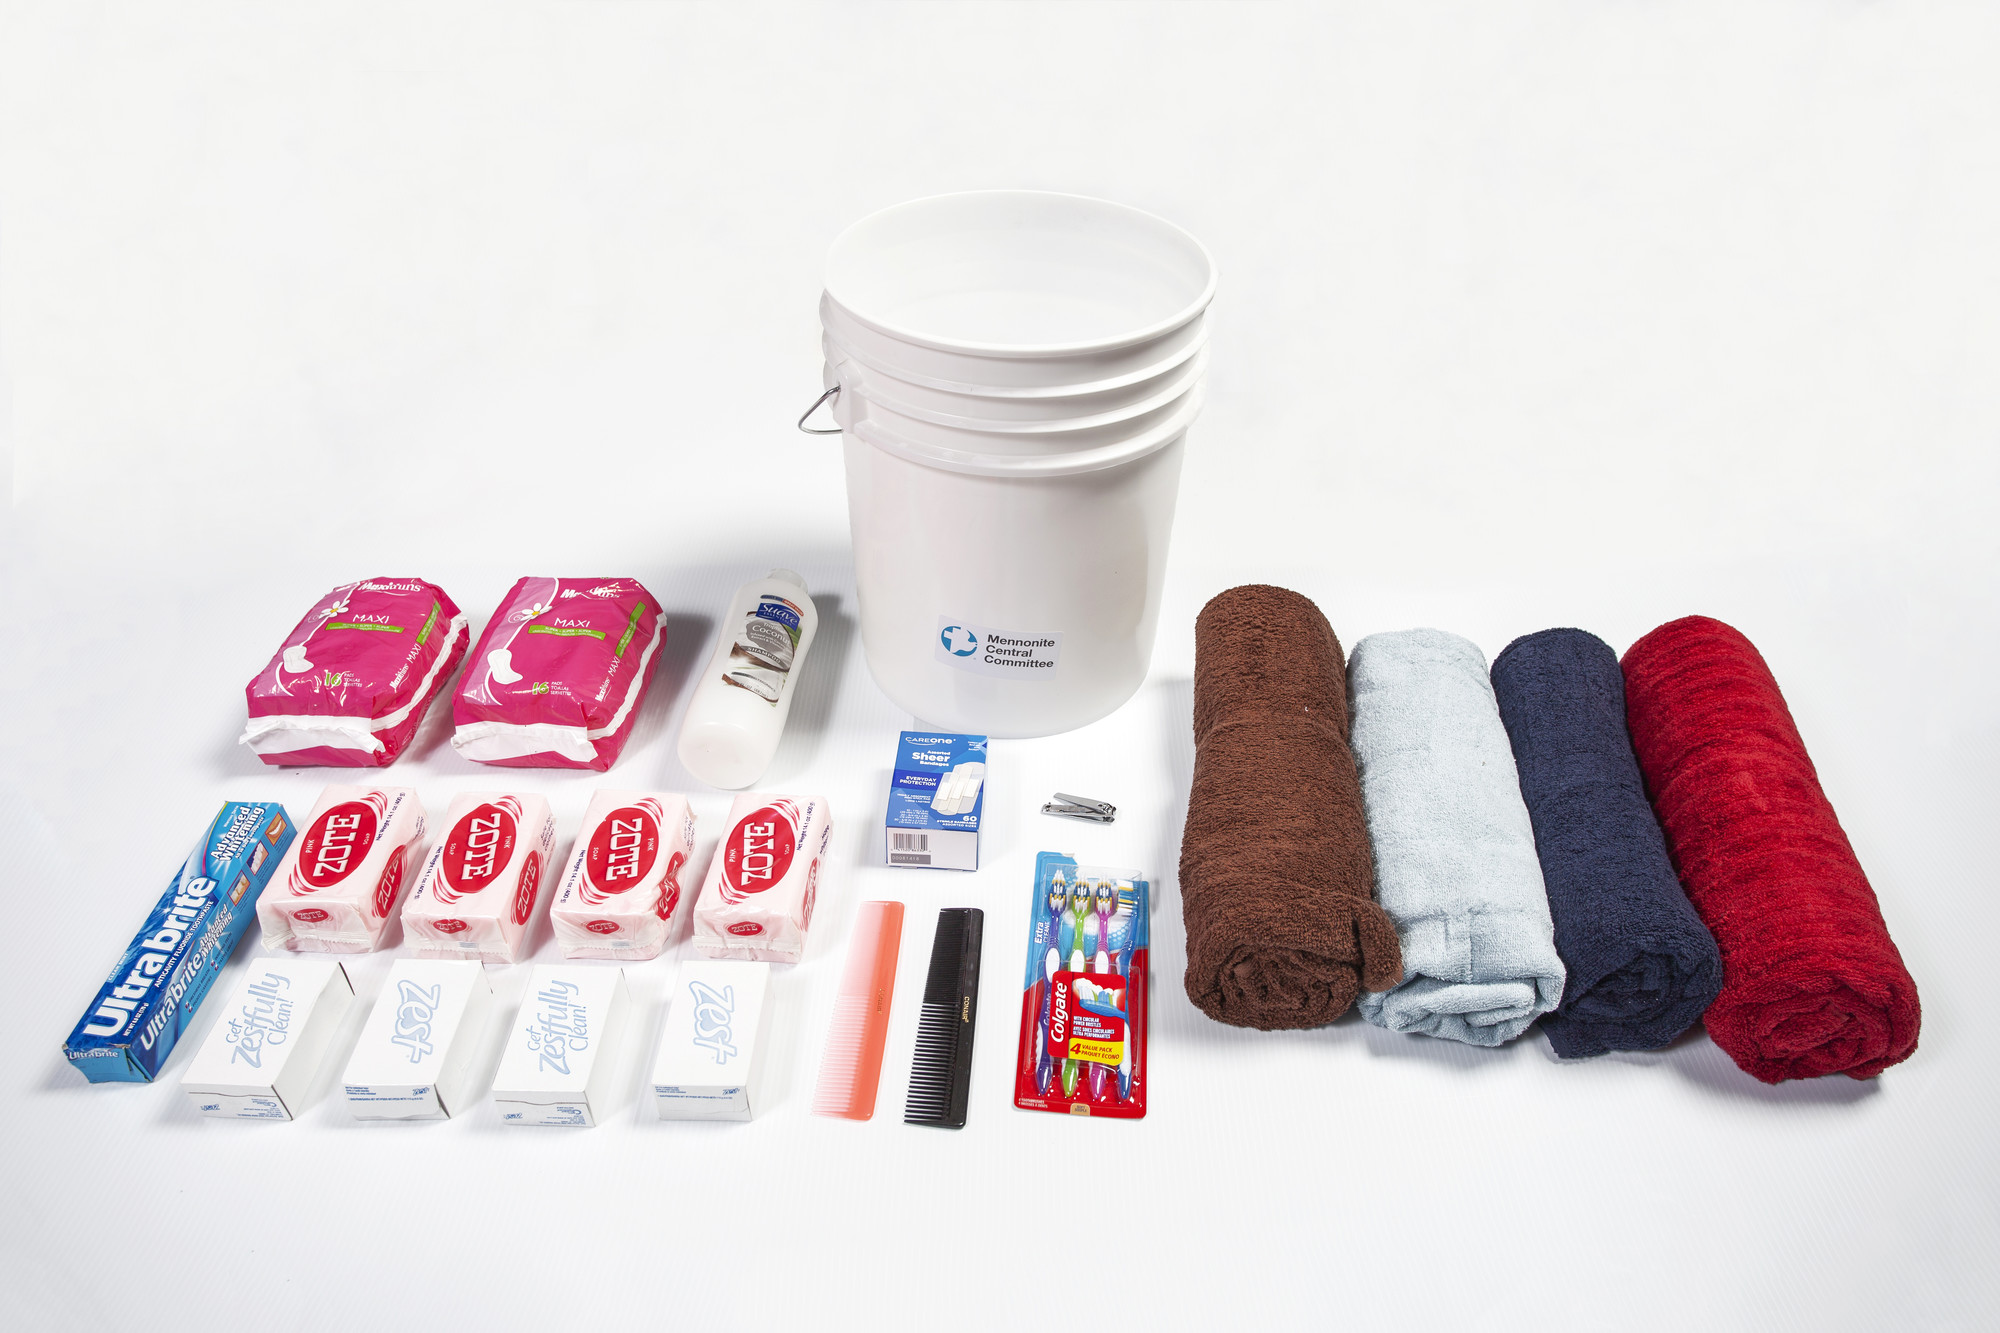 Relief kit contents laid out on a table